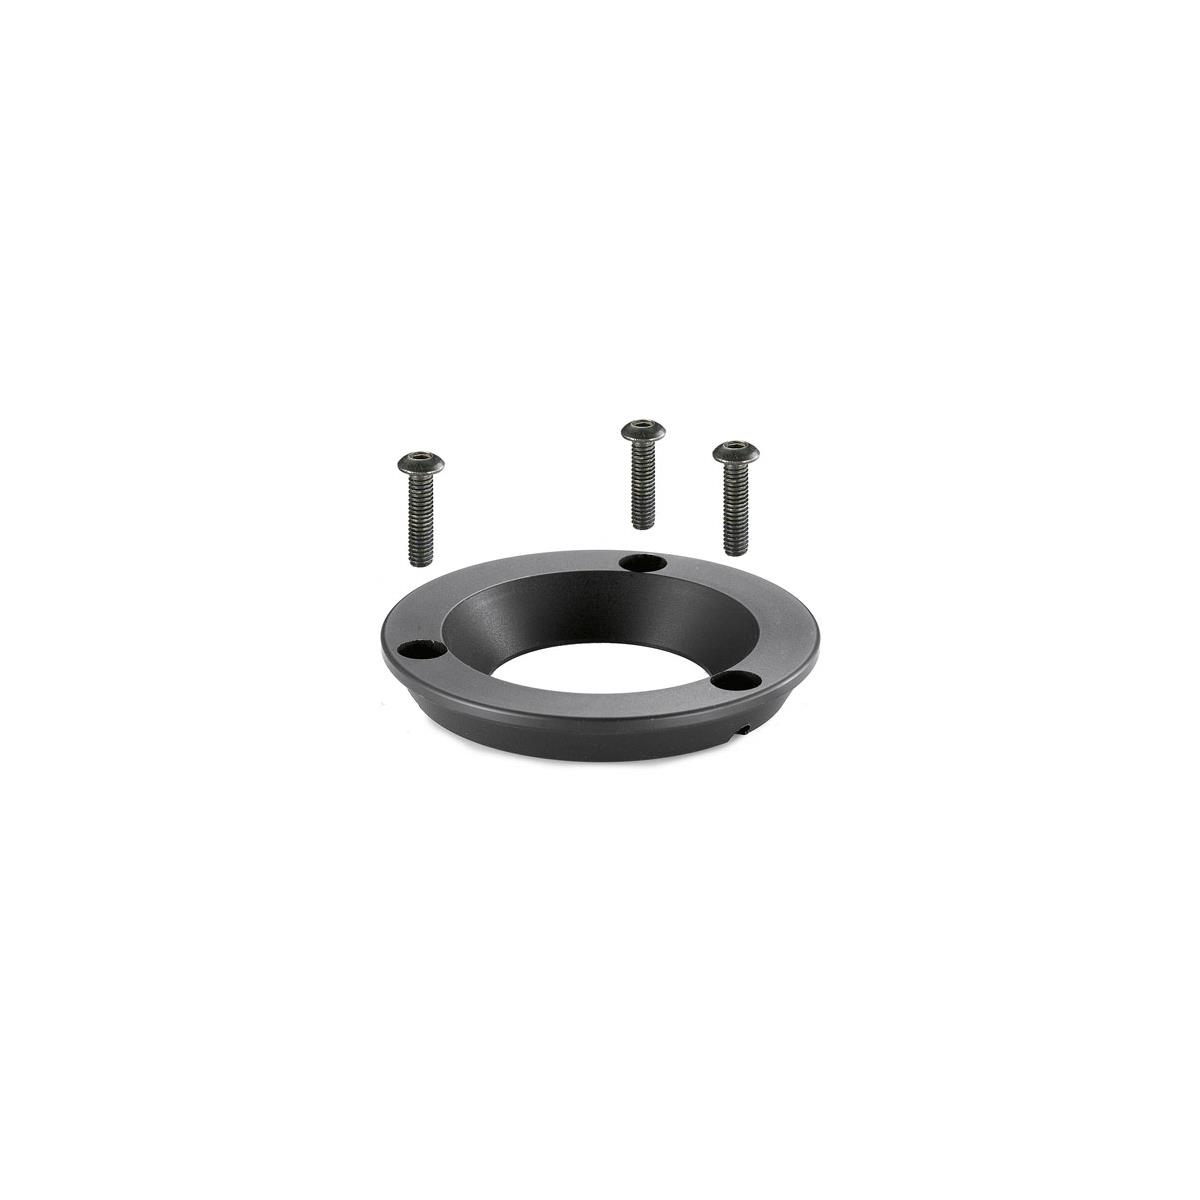 Image of Manfrotto Adapter for 75mm Bowl to 60mm Bowl